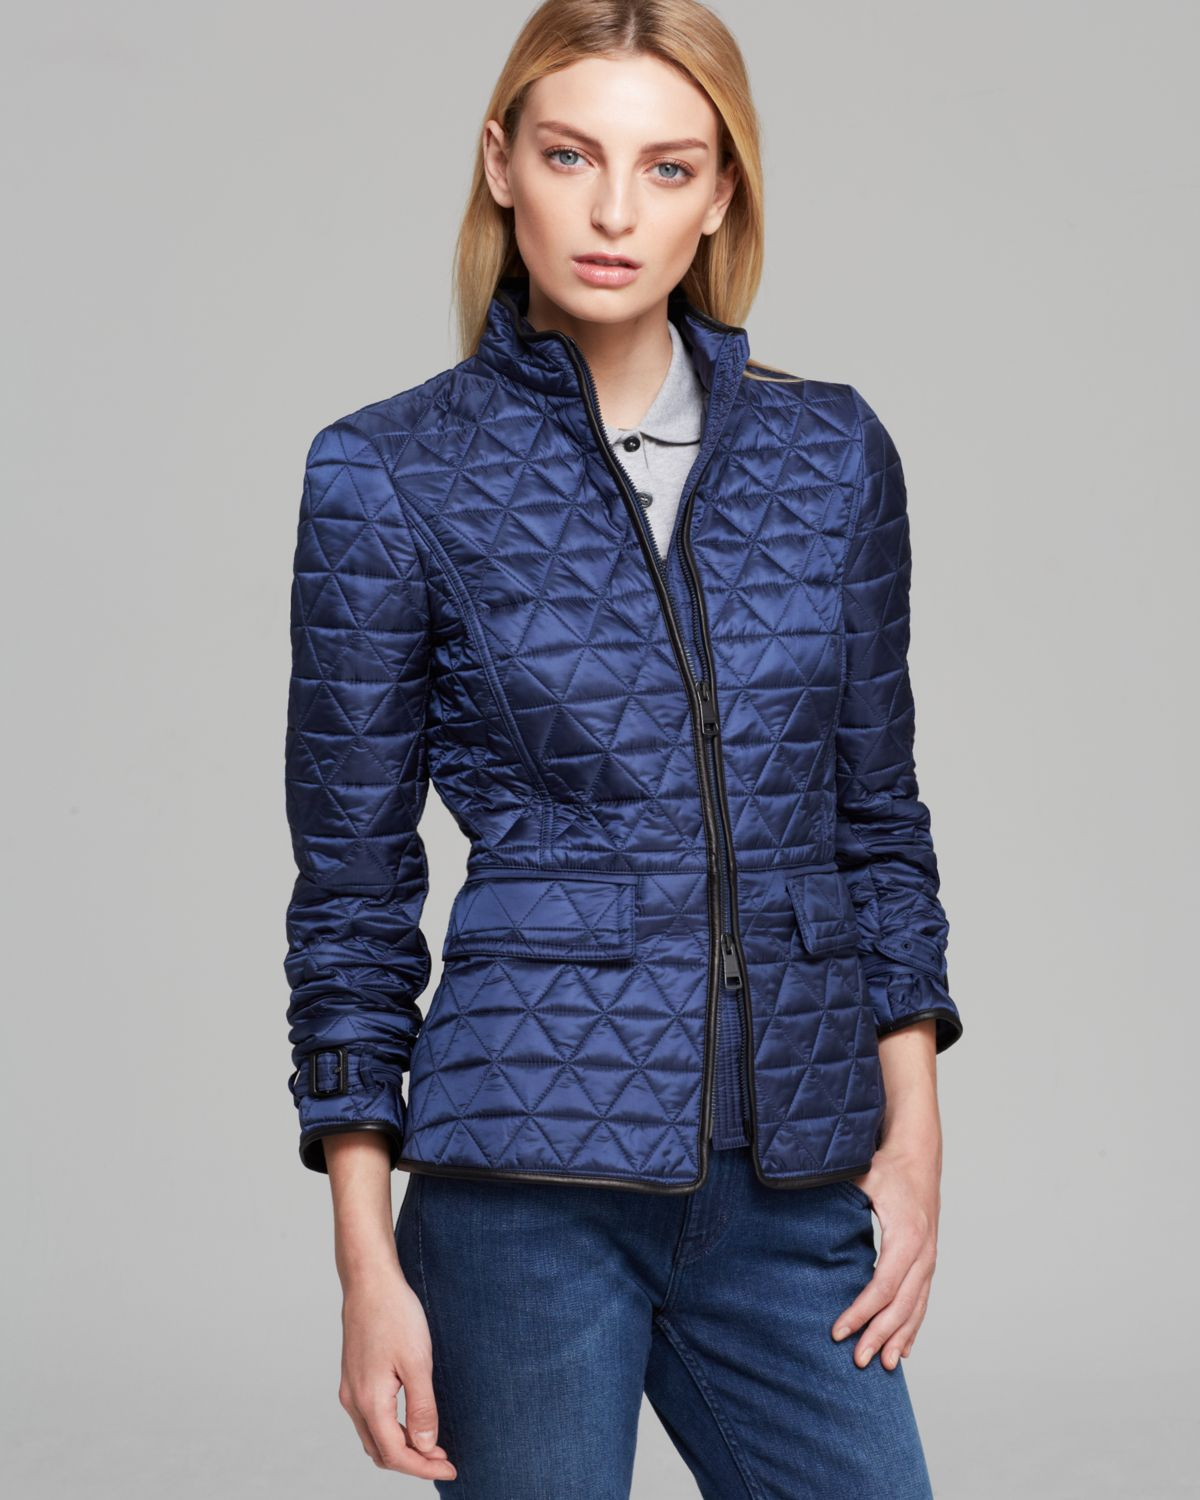 Lyst - Burberry Brit Laycroft Quilted Jacket in Blue